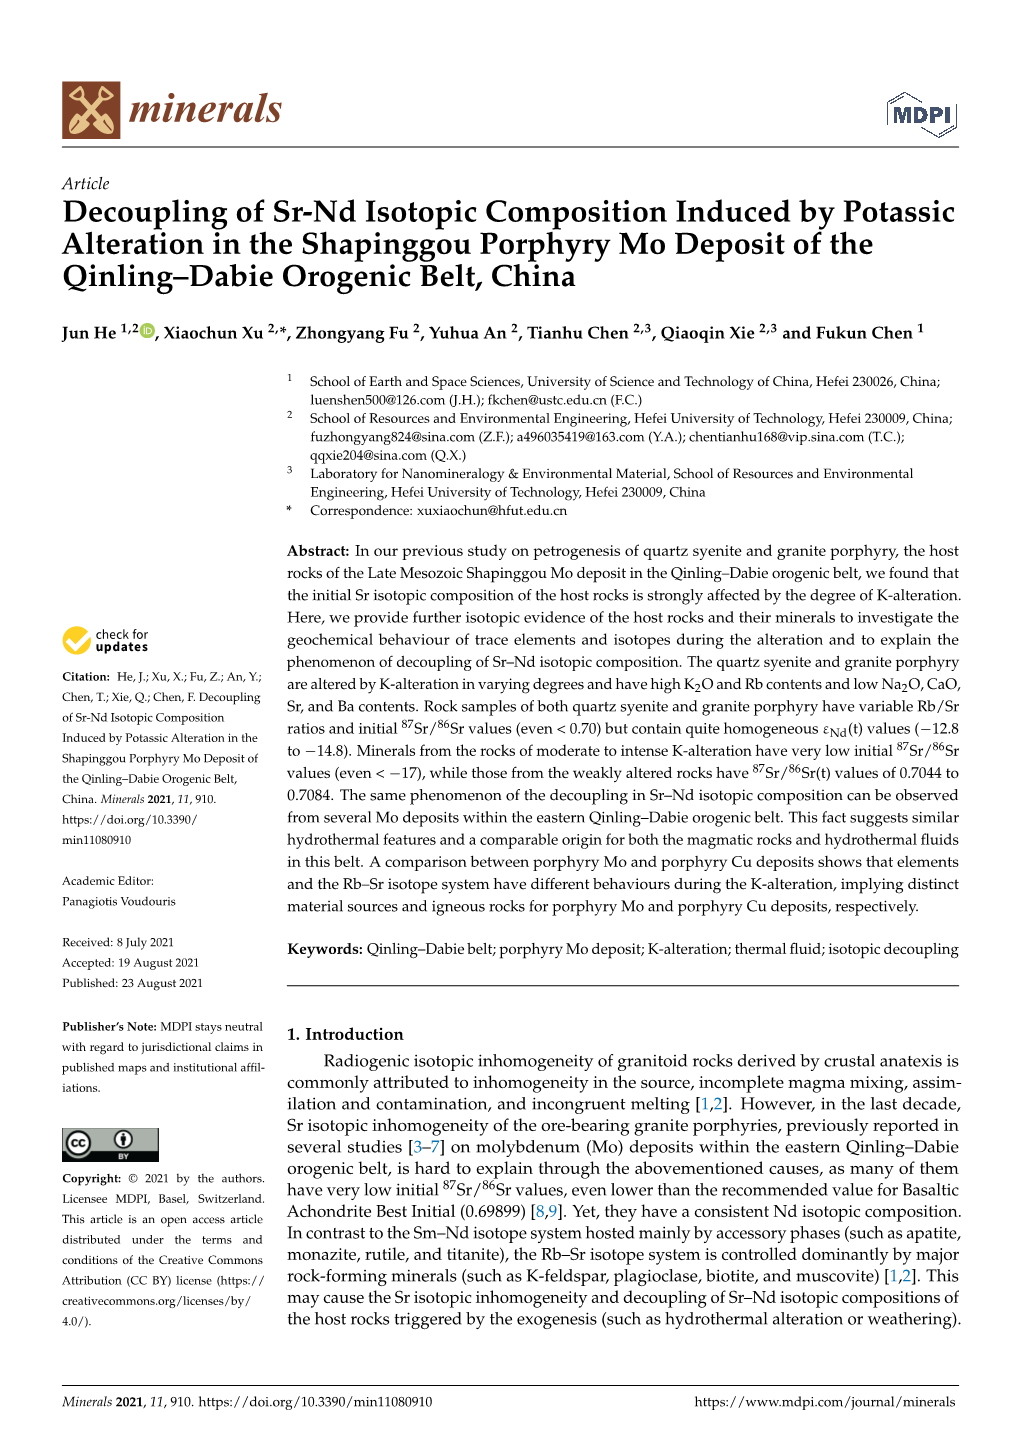 Decoupling of Sr-Nd Isotopic Composition Induced by Potassic Alteration in the Shapinggou Porphyry Mo Deposit of the Qinling–Dabie Orogenic Belt, China